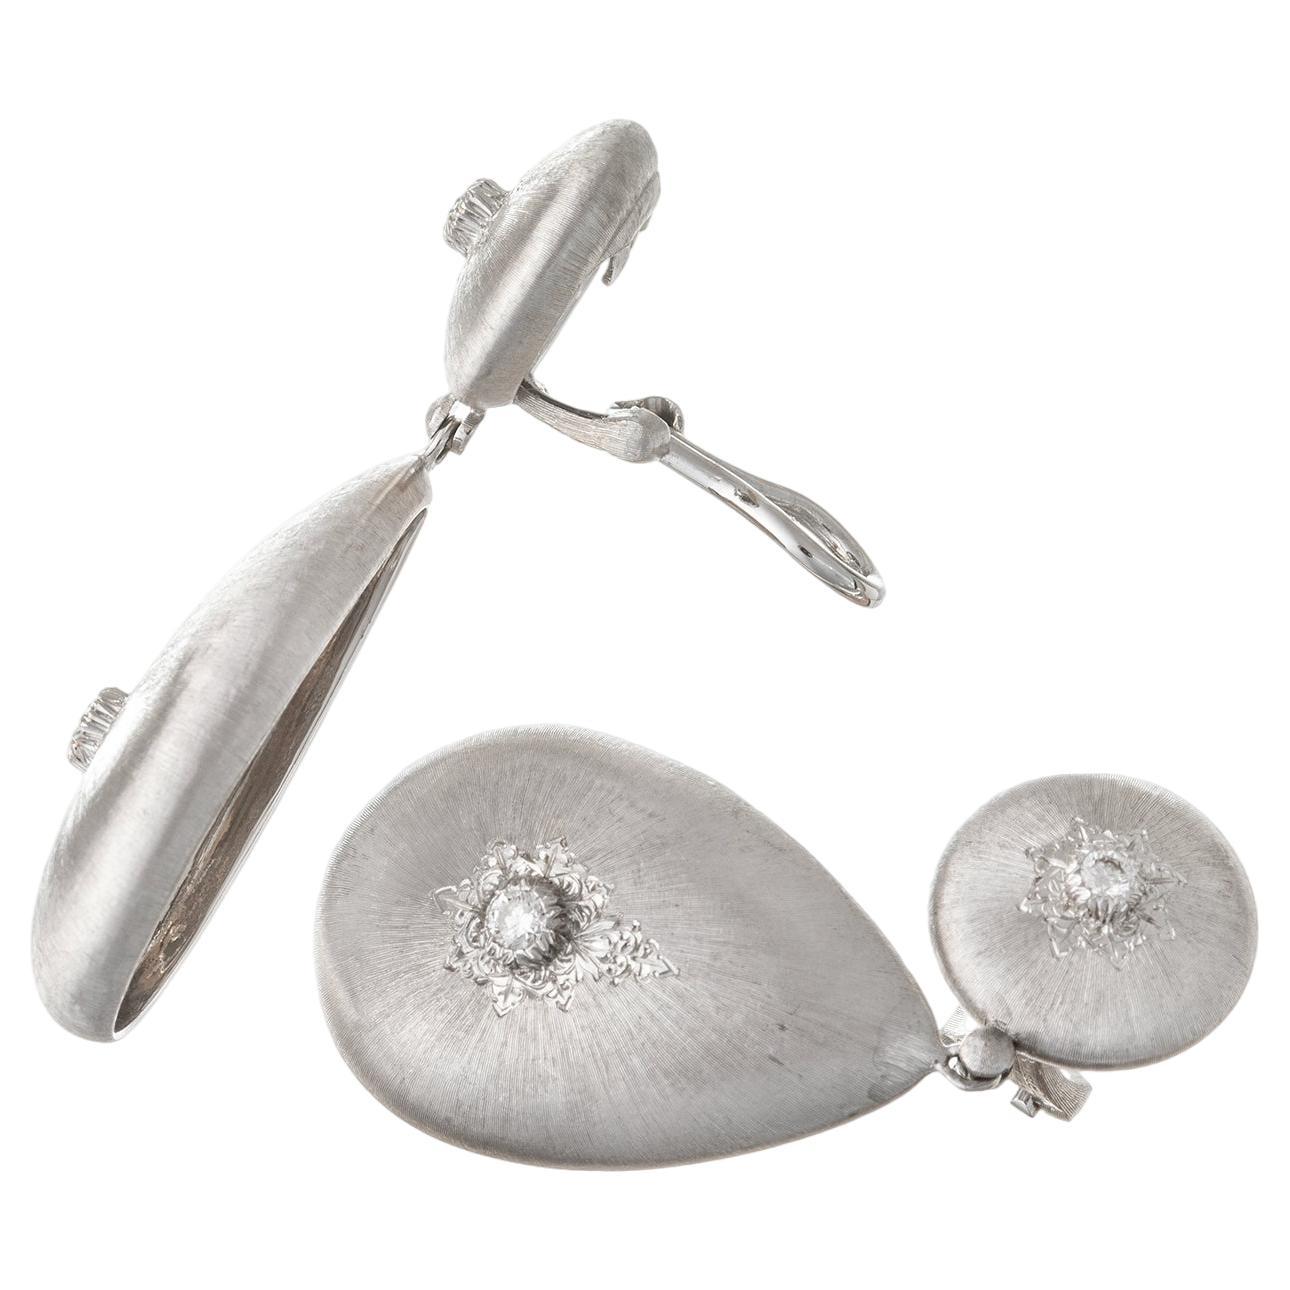 Larger-sized version of Buccellati's 'Macri Classica' earrings, featuring circular tops with teardrop bottoms both having a raised dome design in 18k white gold with the beautiful signature hand engraving of Buccellati's workshop called the 'Rigato'